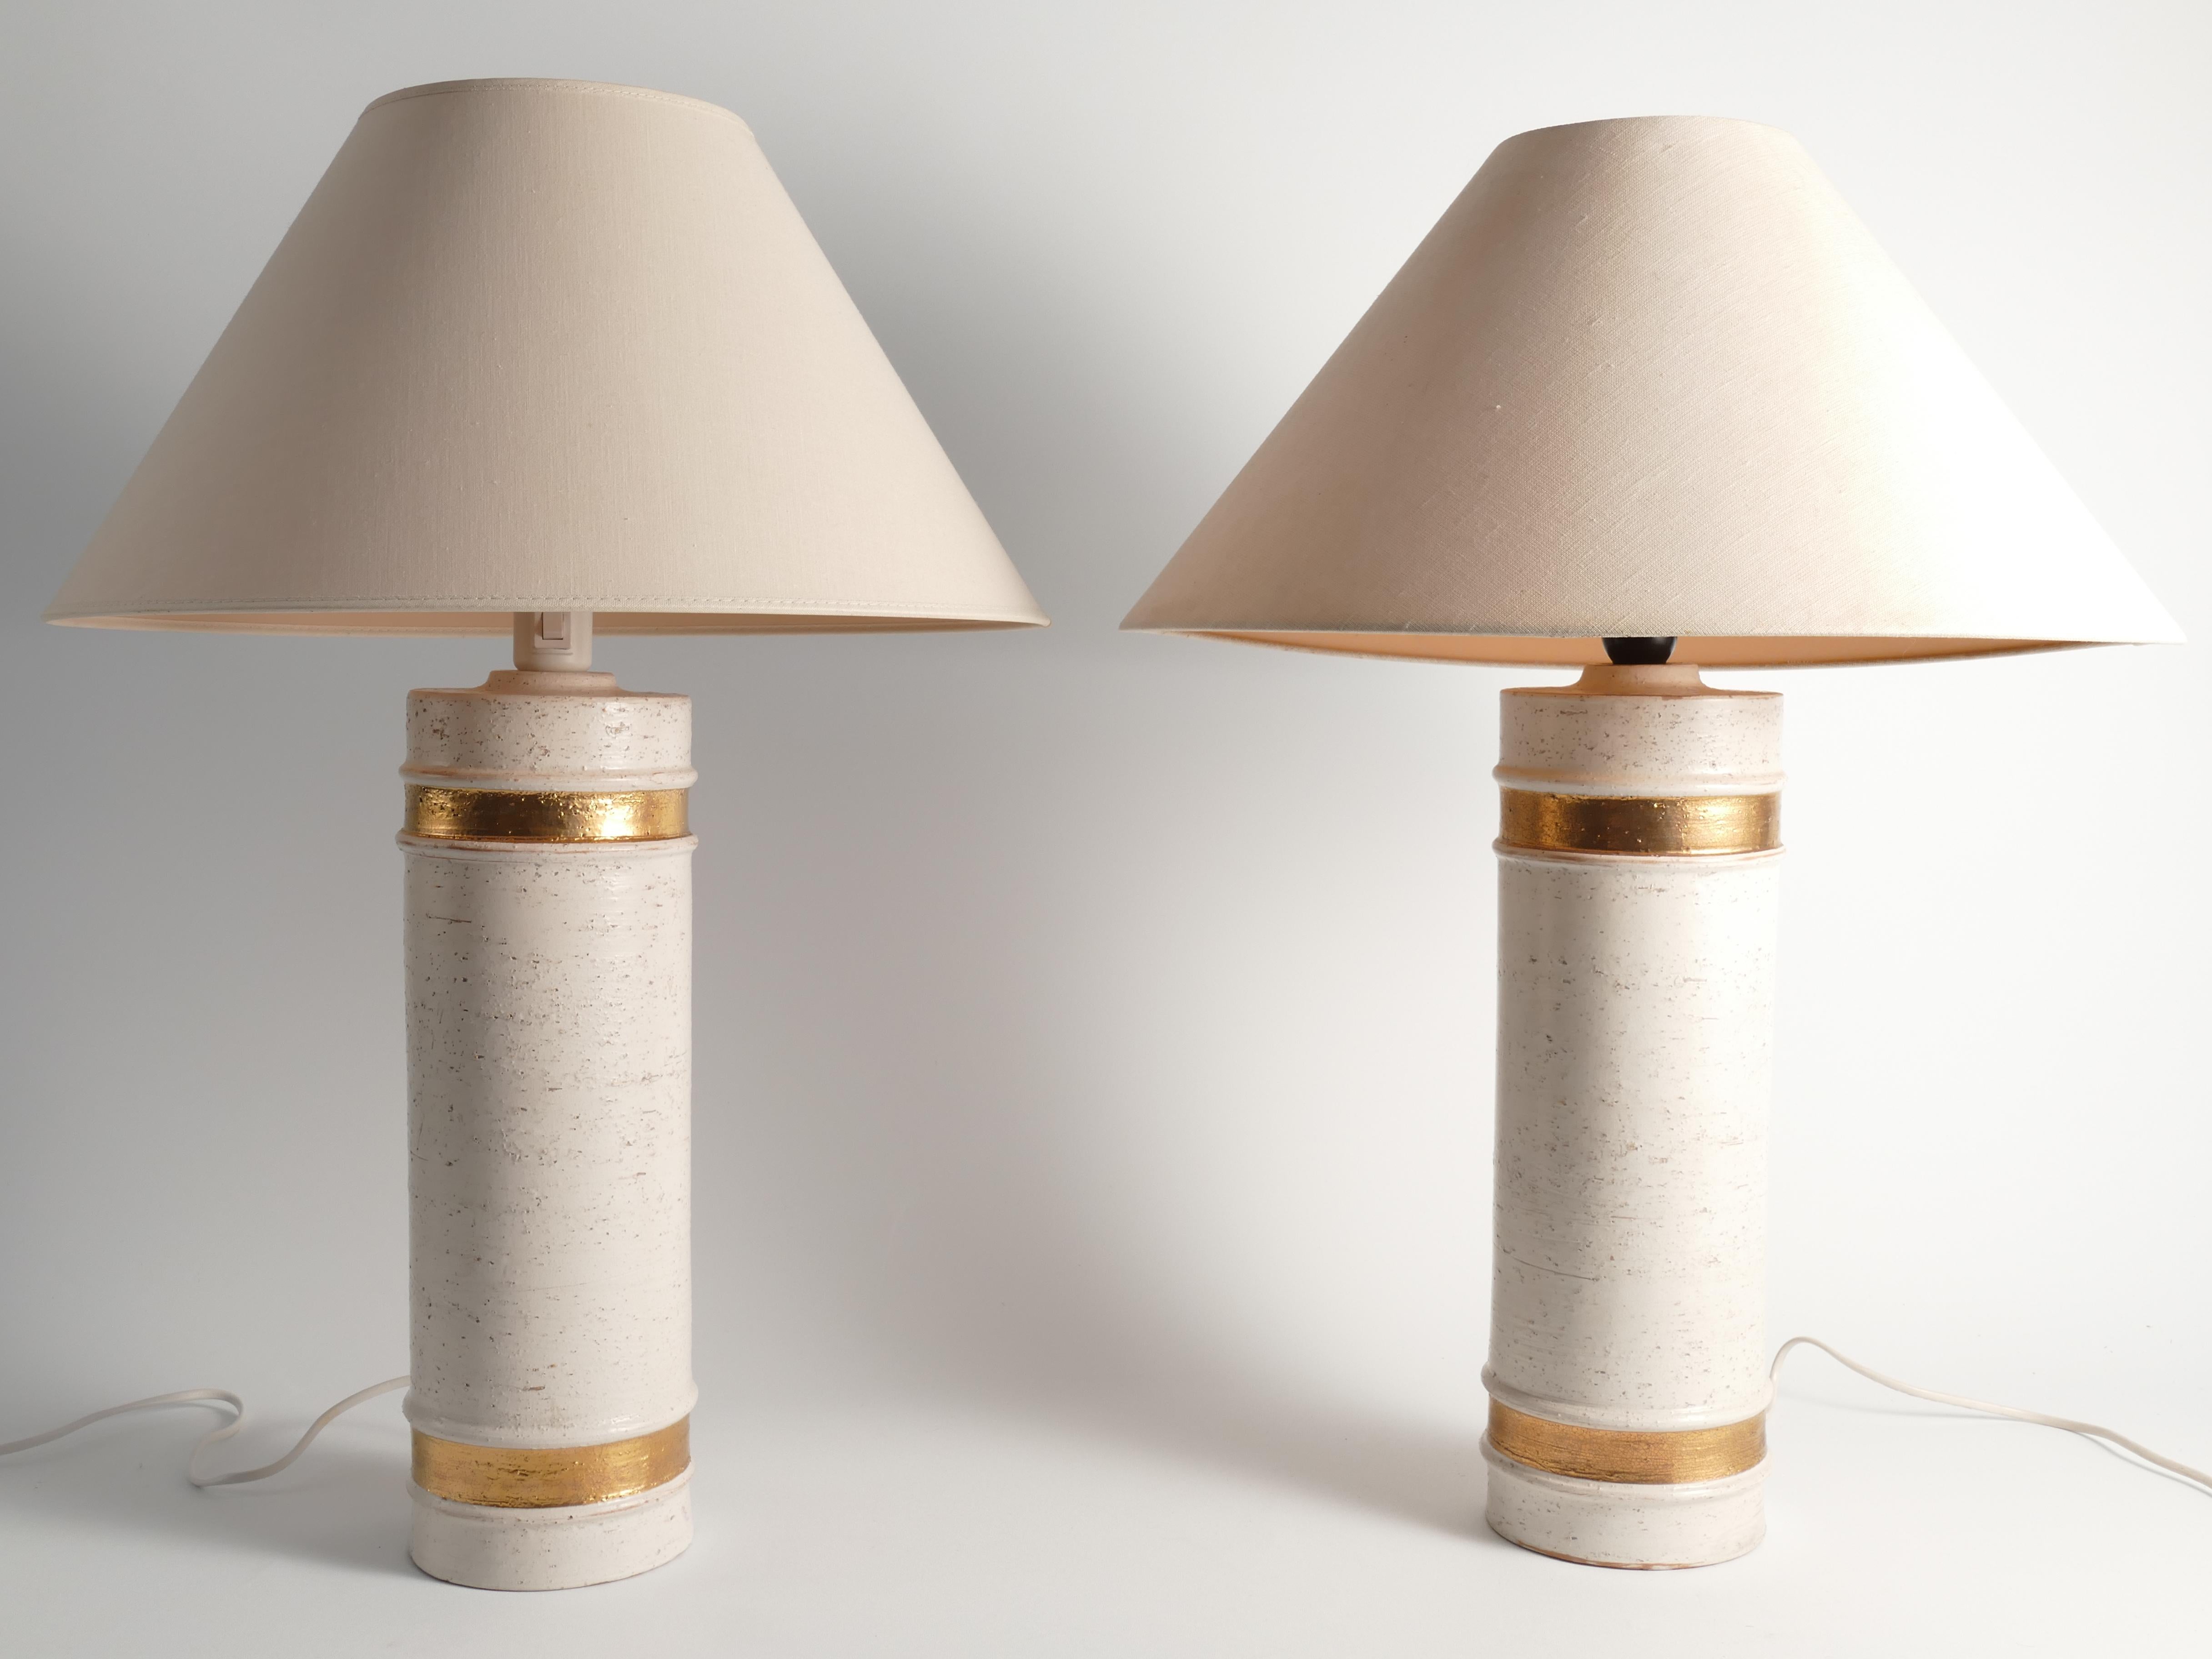 Mid-century Modern Ceramic Table Lamps by Bitossi for Bergboms, Set of 2, 1970's For Sale 7